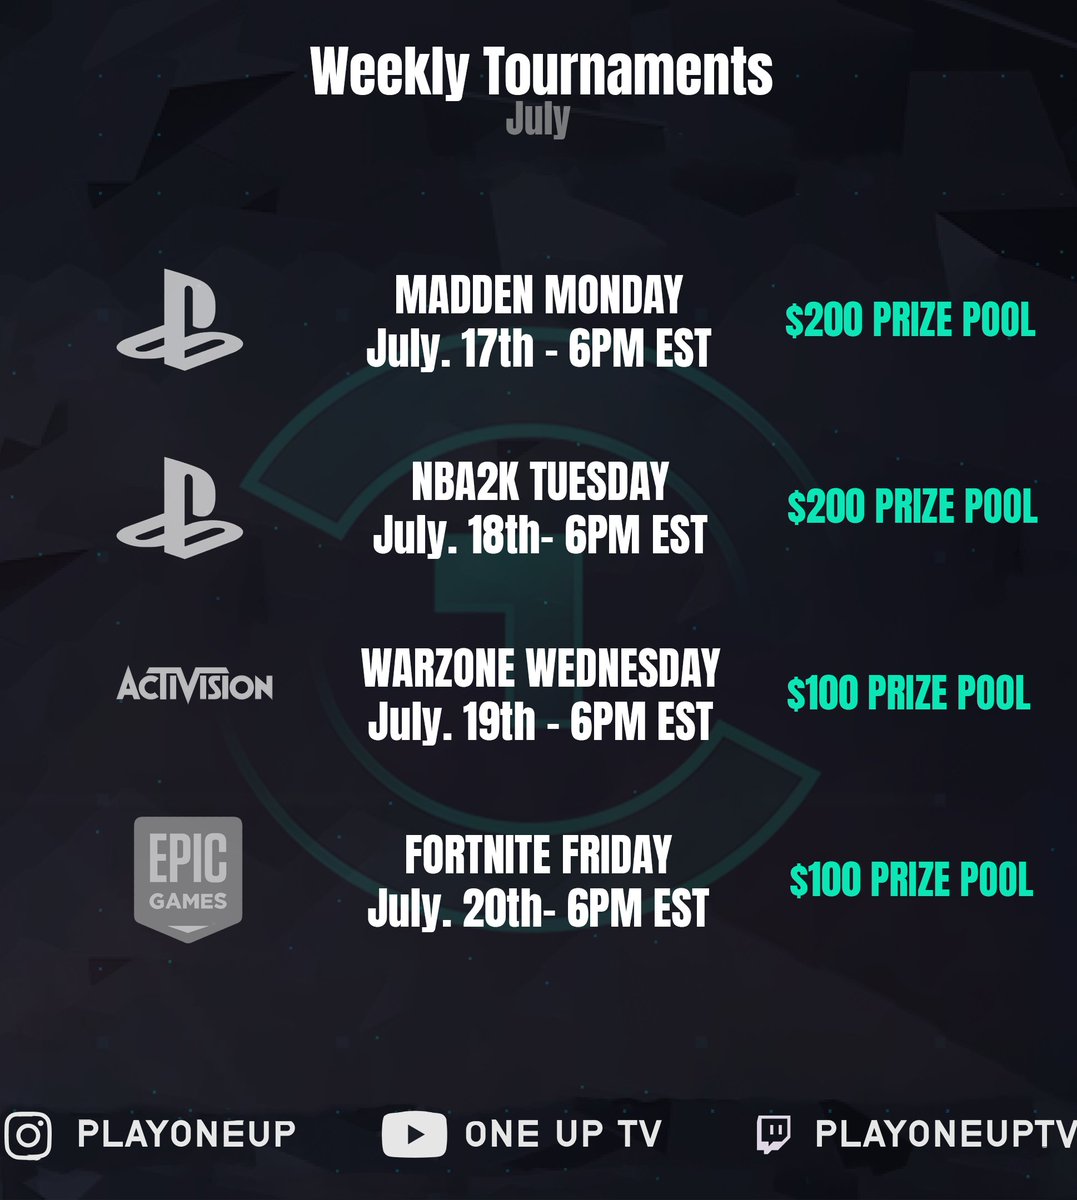 🔥🎮 Unleash your gaming prowess in this week's tournaments on Play One Up! #ItPaysToPlay #GamingTournaments
Sign up here ➡️ playoneup.com